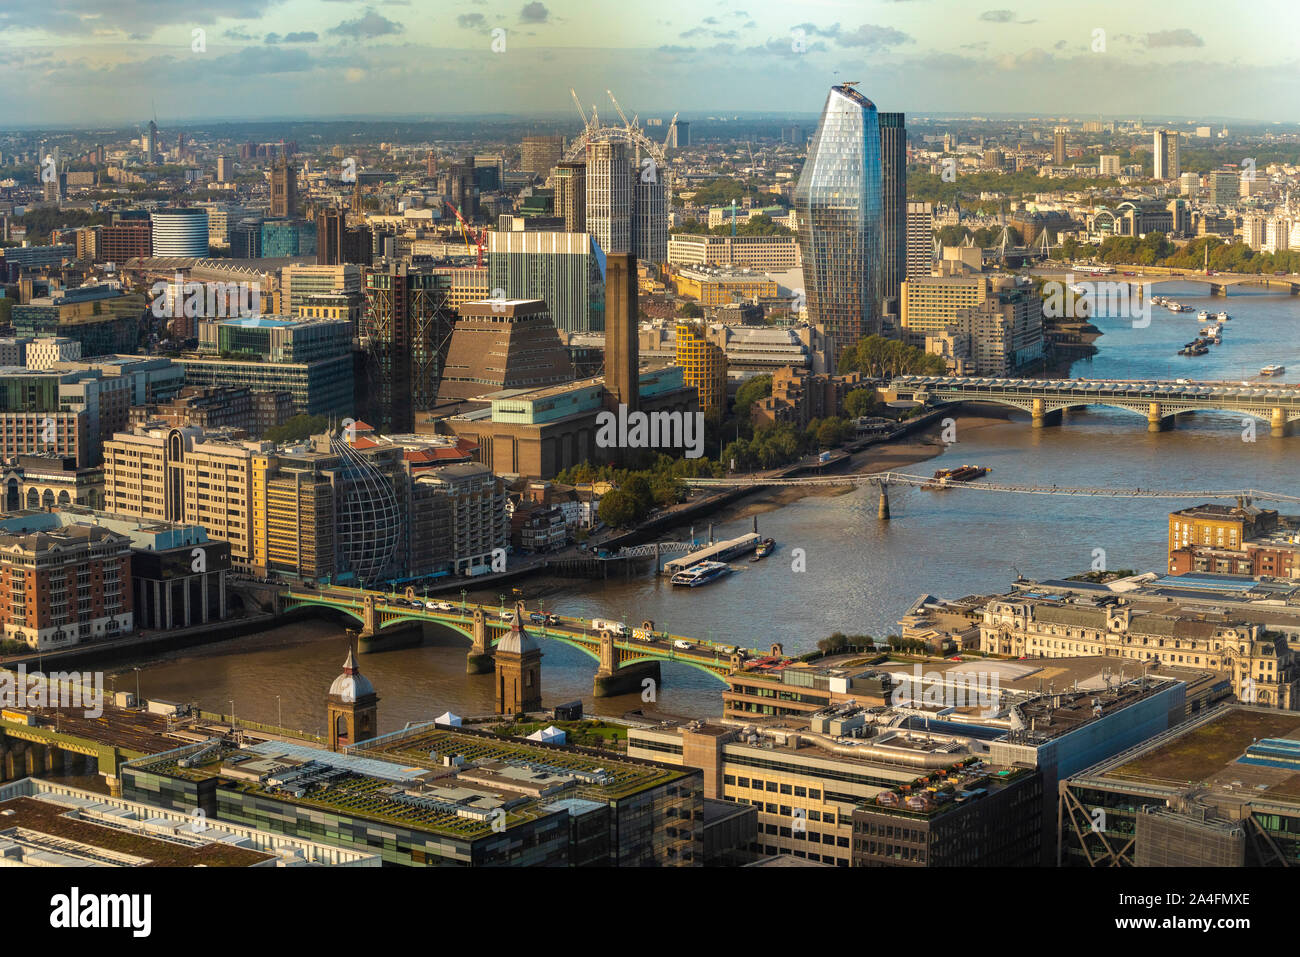 Thames river with blackfriars, london bridge and view of london city Stock Photo